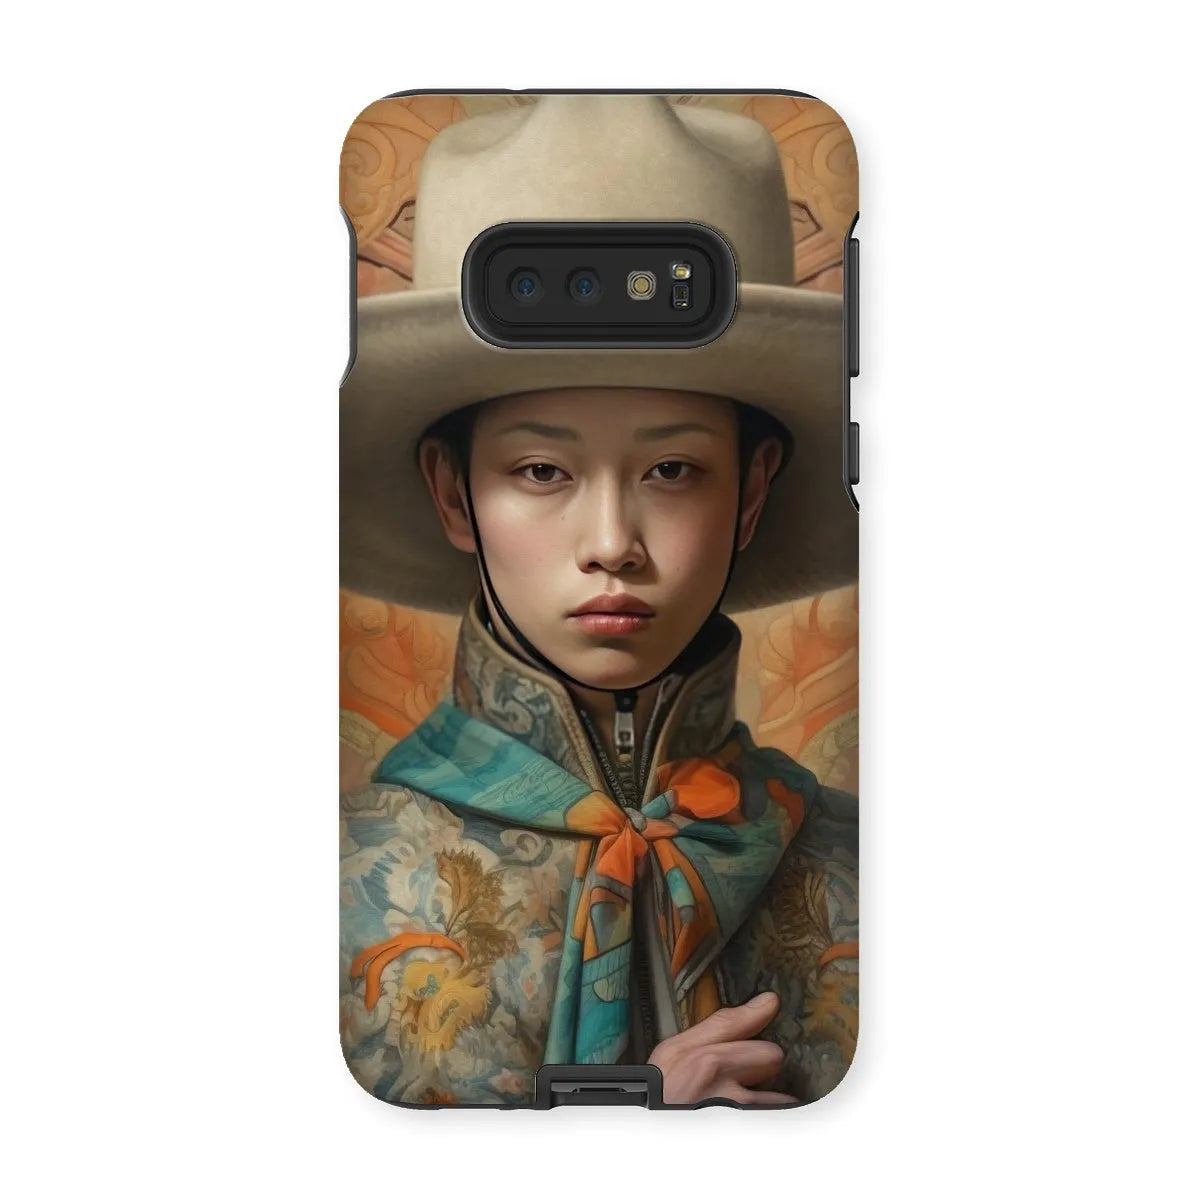 Xiang - Gaysian Chinese Cowboy Aesthetic Art Phone Case - Samsung Galaxy S10e / Matte - Mobile Phone Cases - Aesthetic